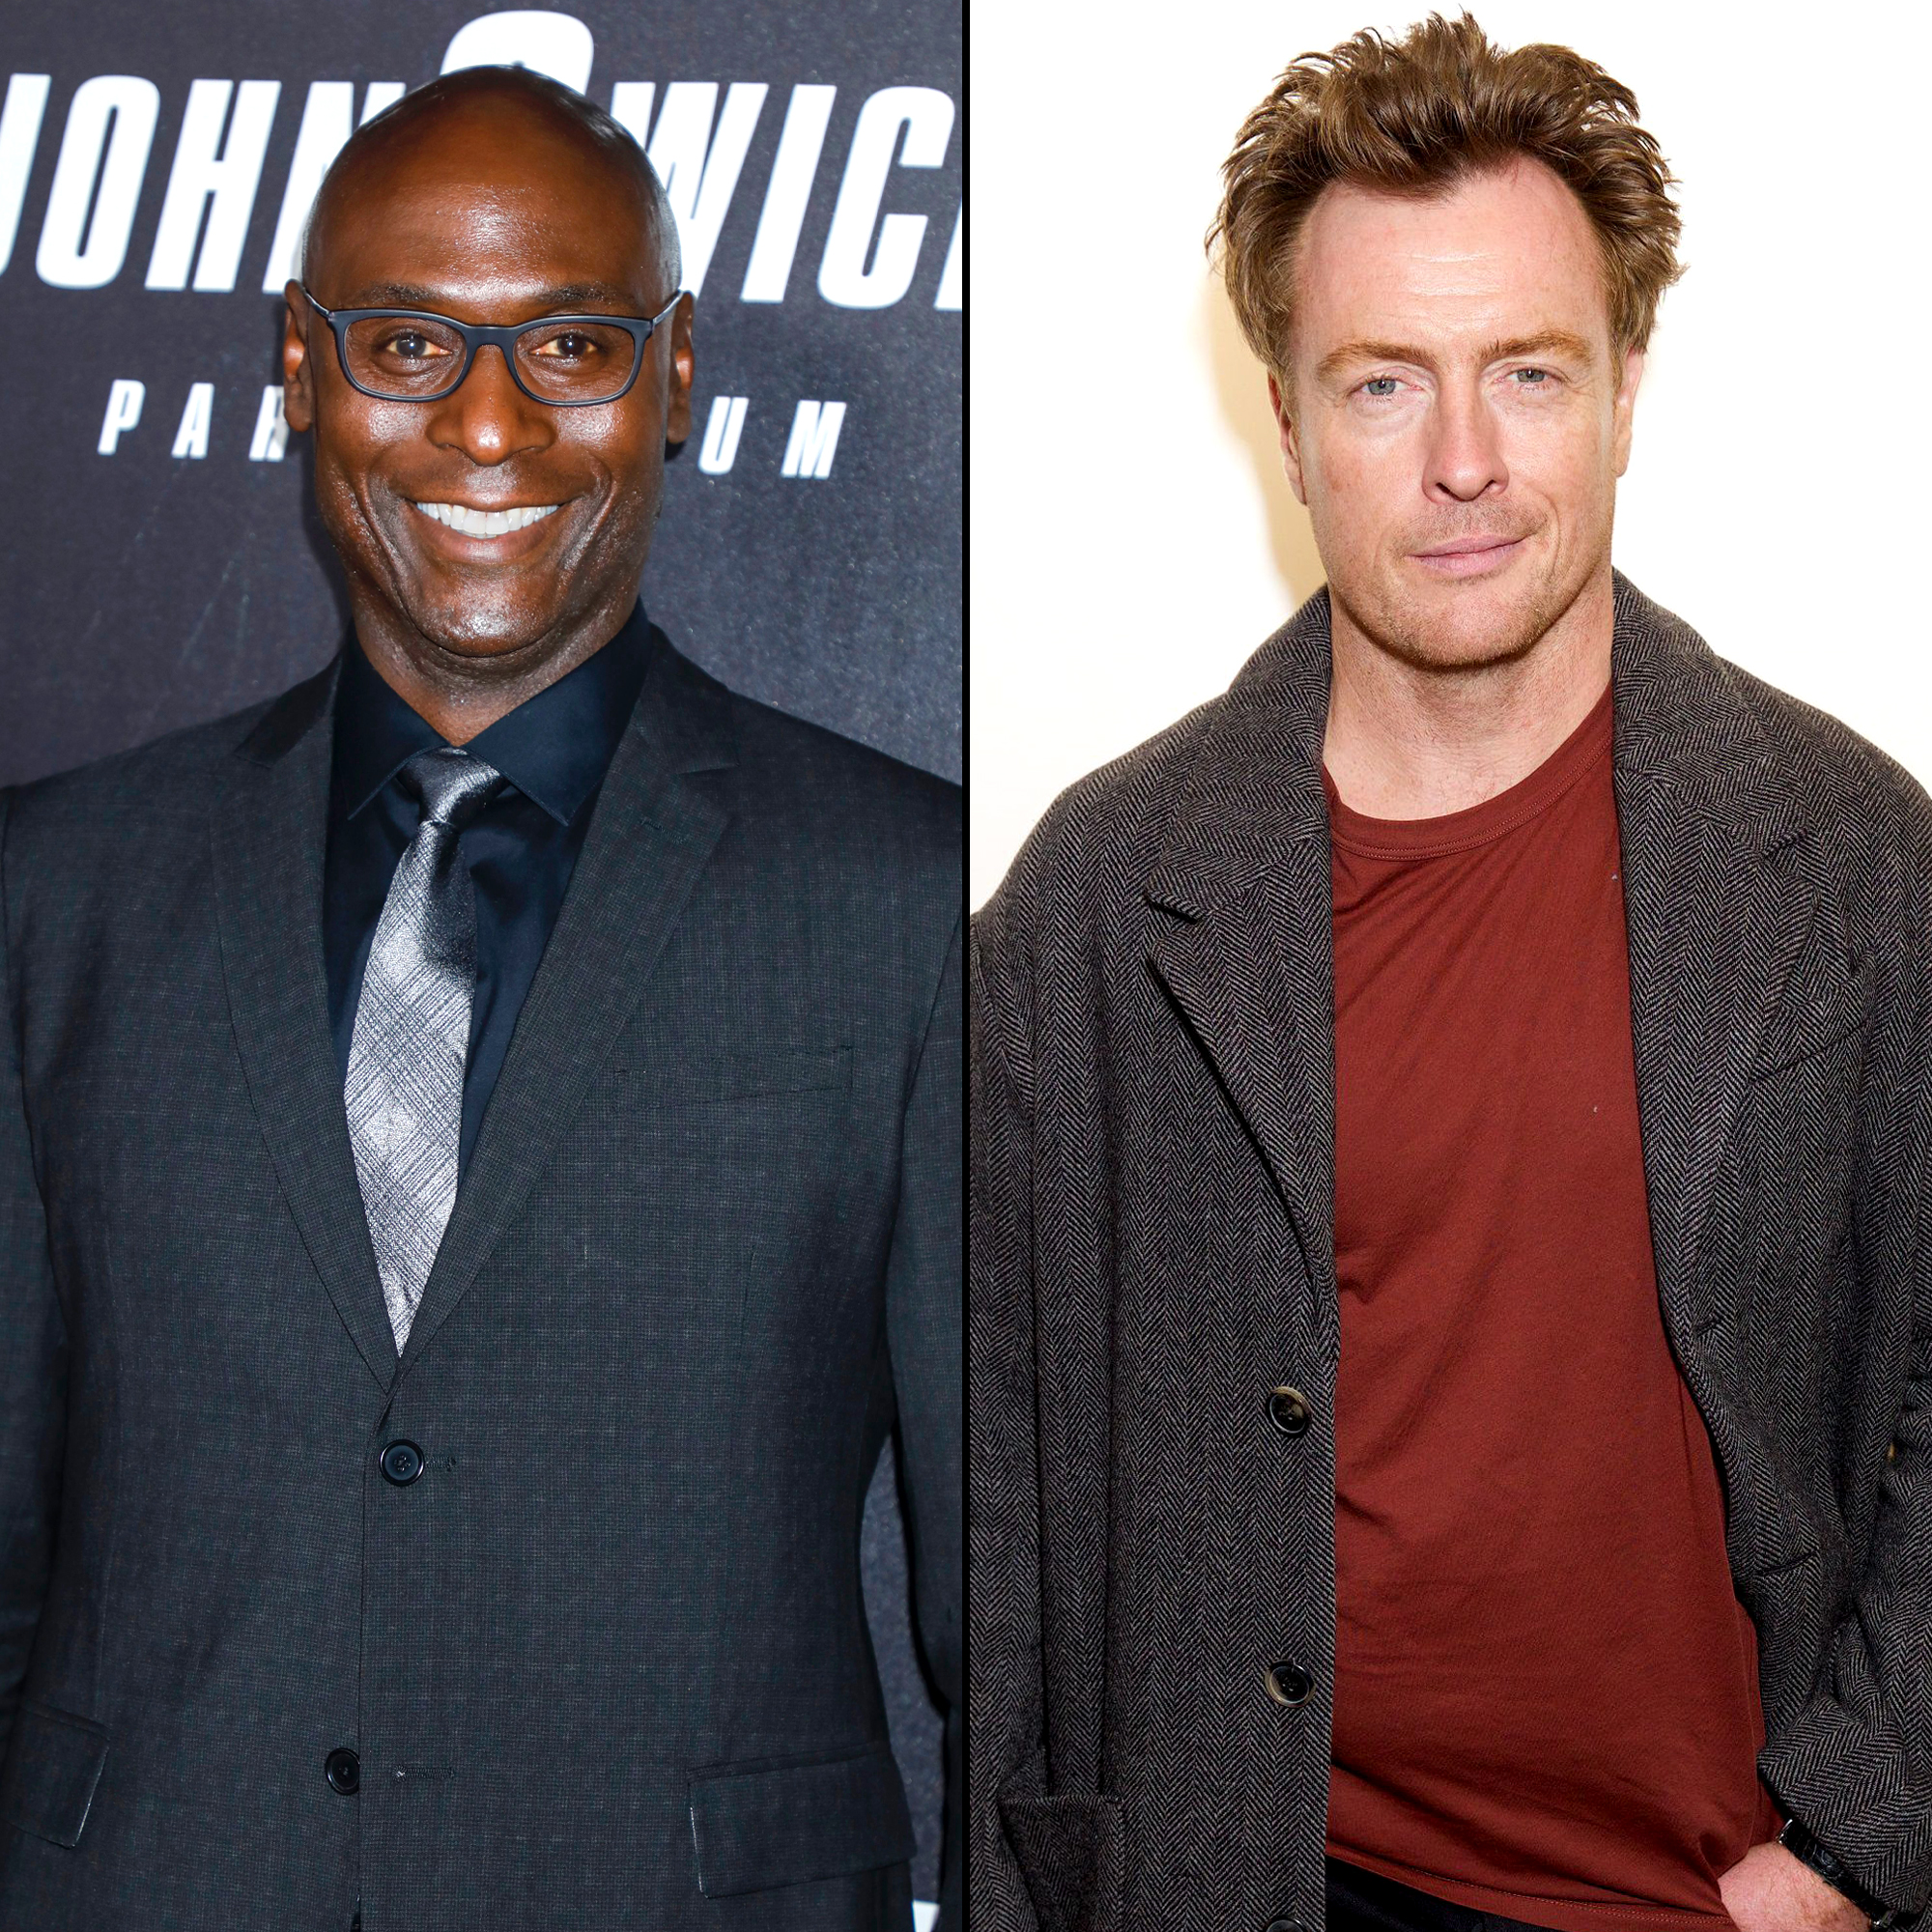 Percy Jackson Casts Lance Reddick as Zeus and Toby Stephens as